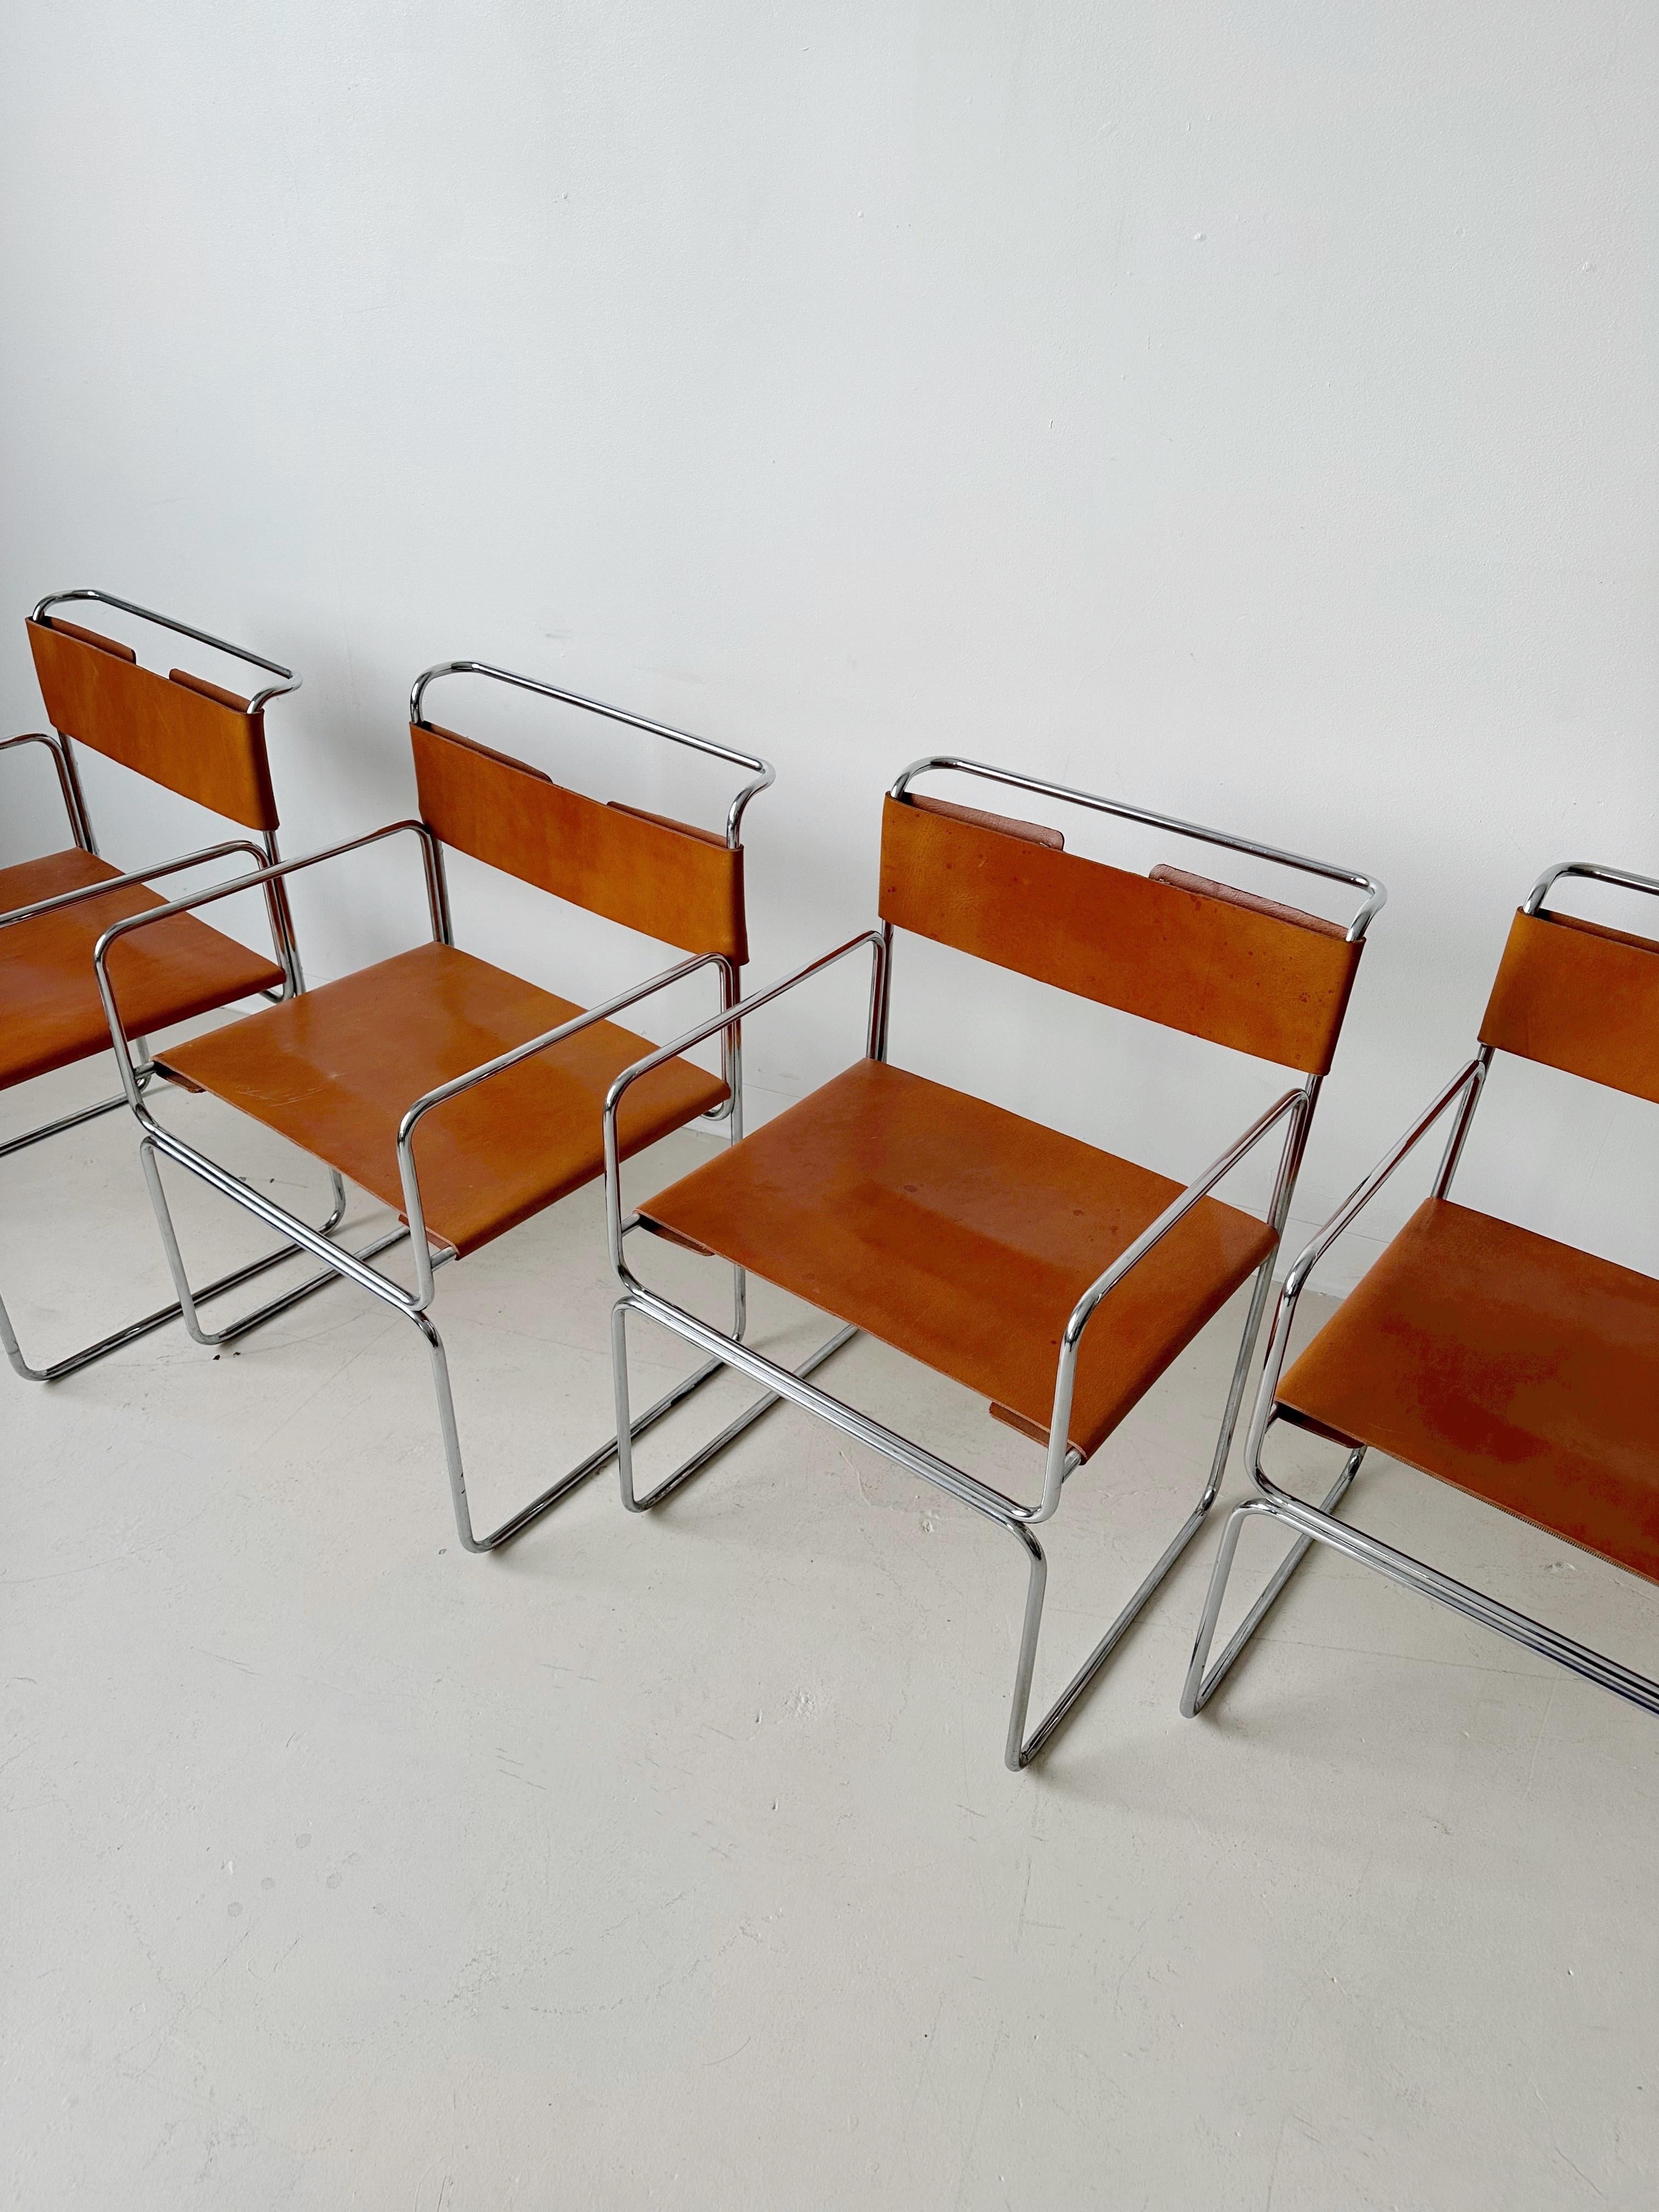 Tan Leather Libellula Chairs by Giovanni Carini for Planula, 70's For Sale 7